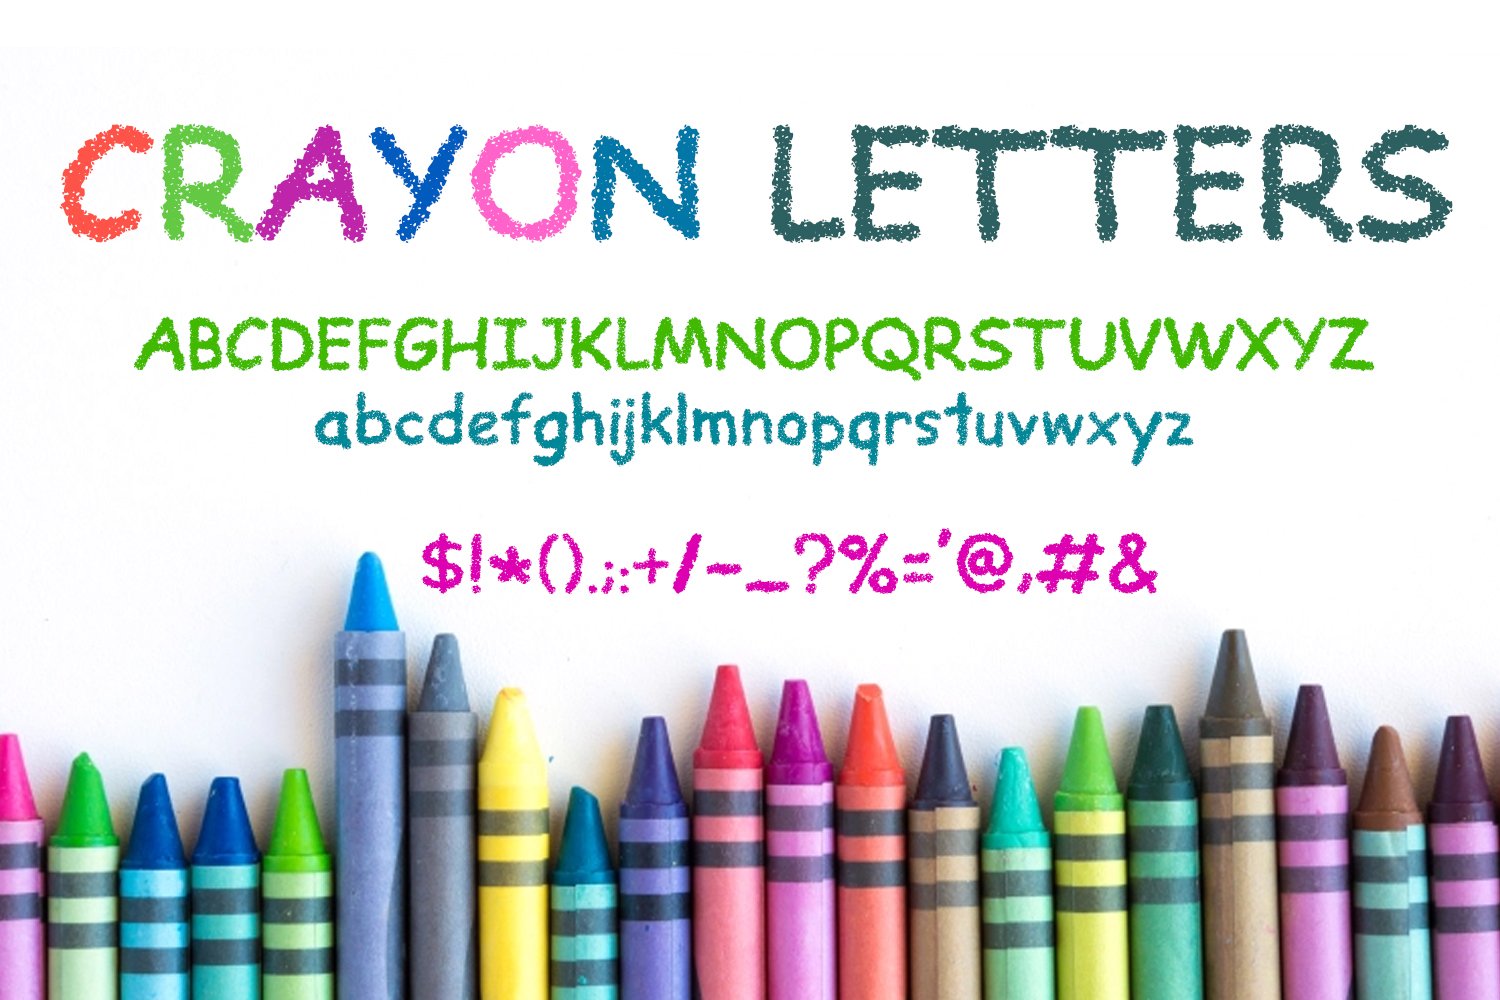 Crayon Letters Font cover image.